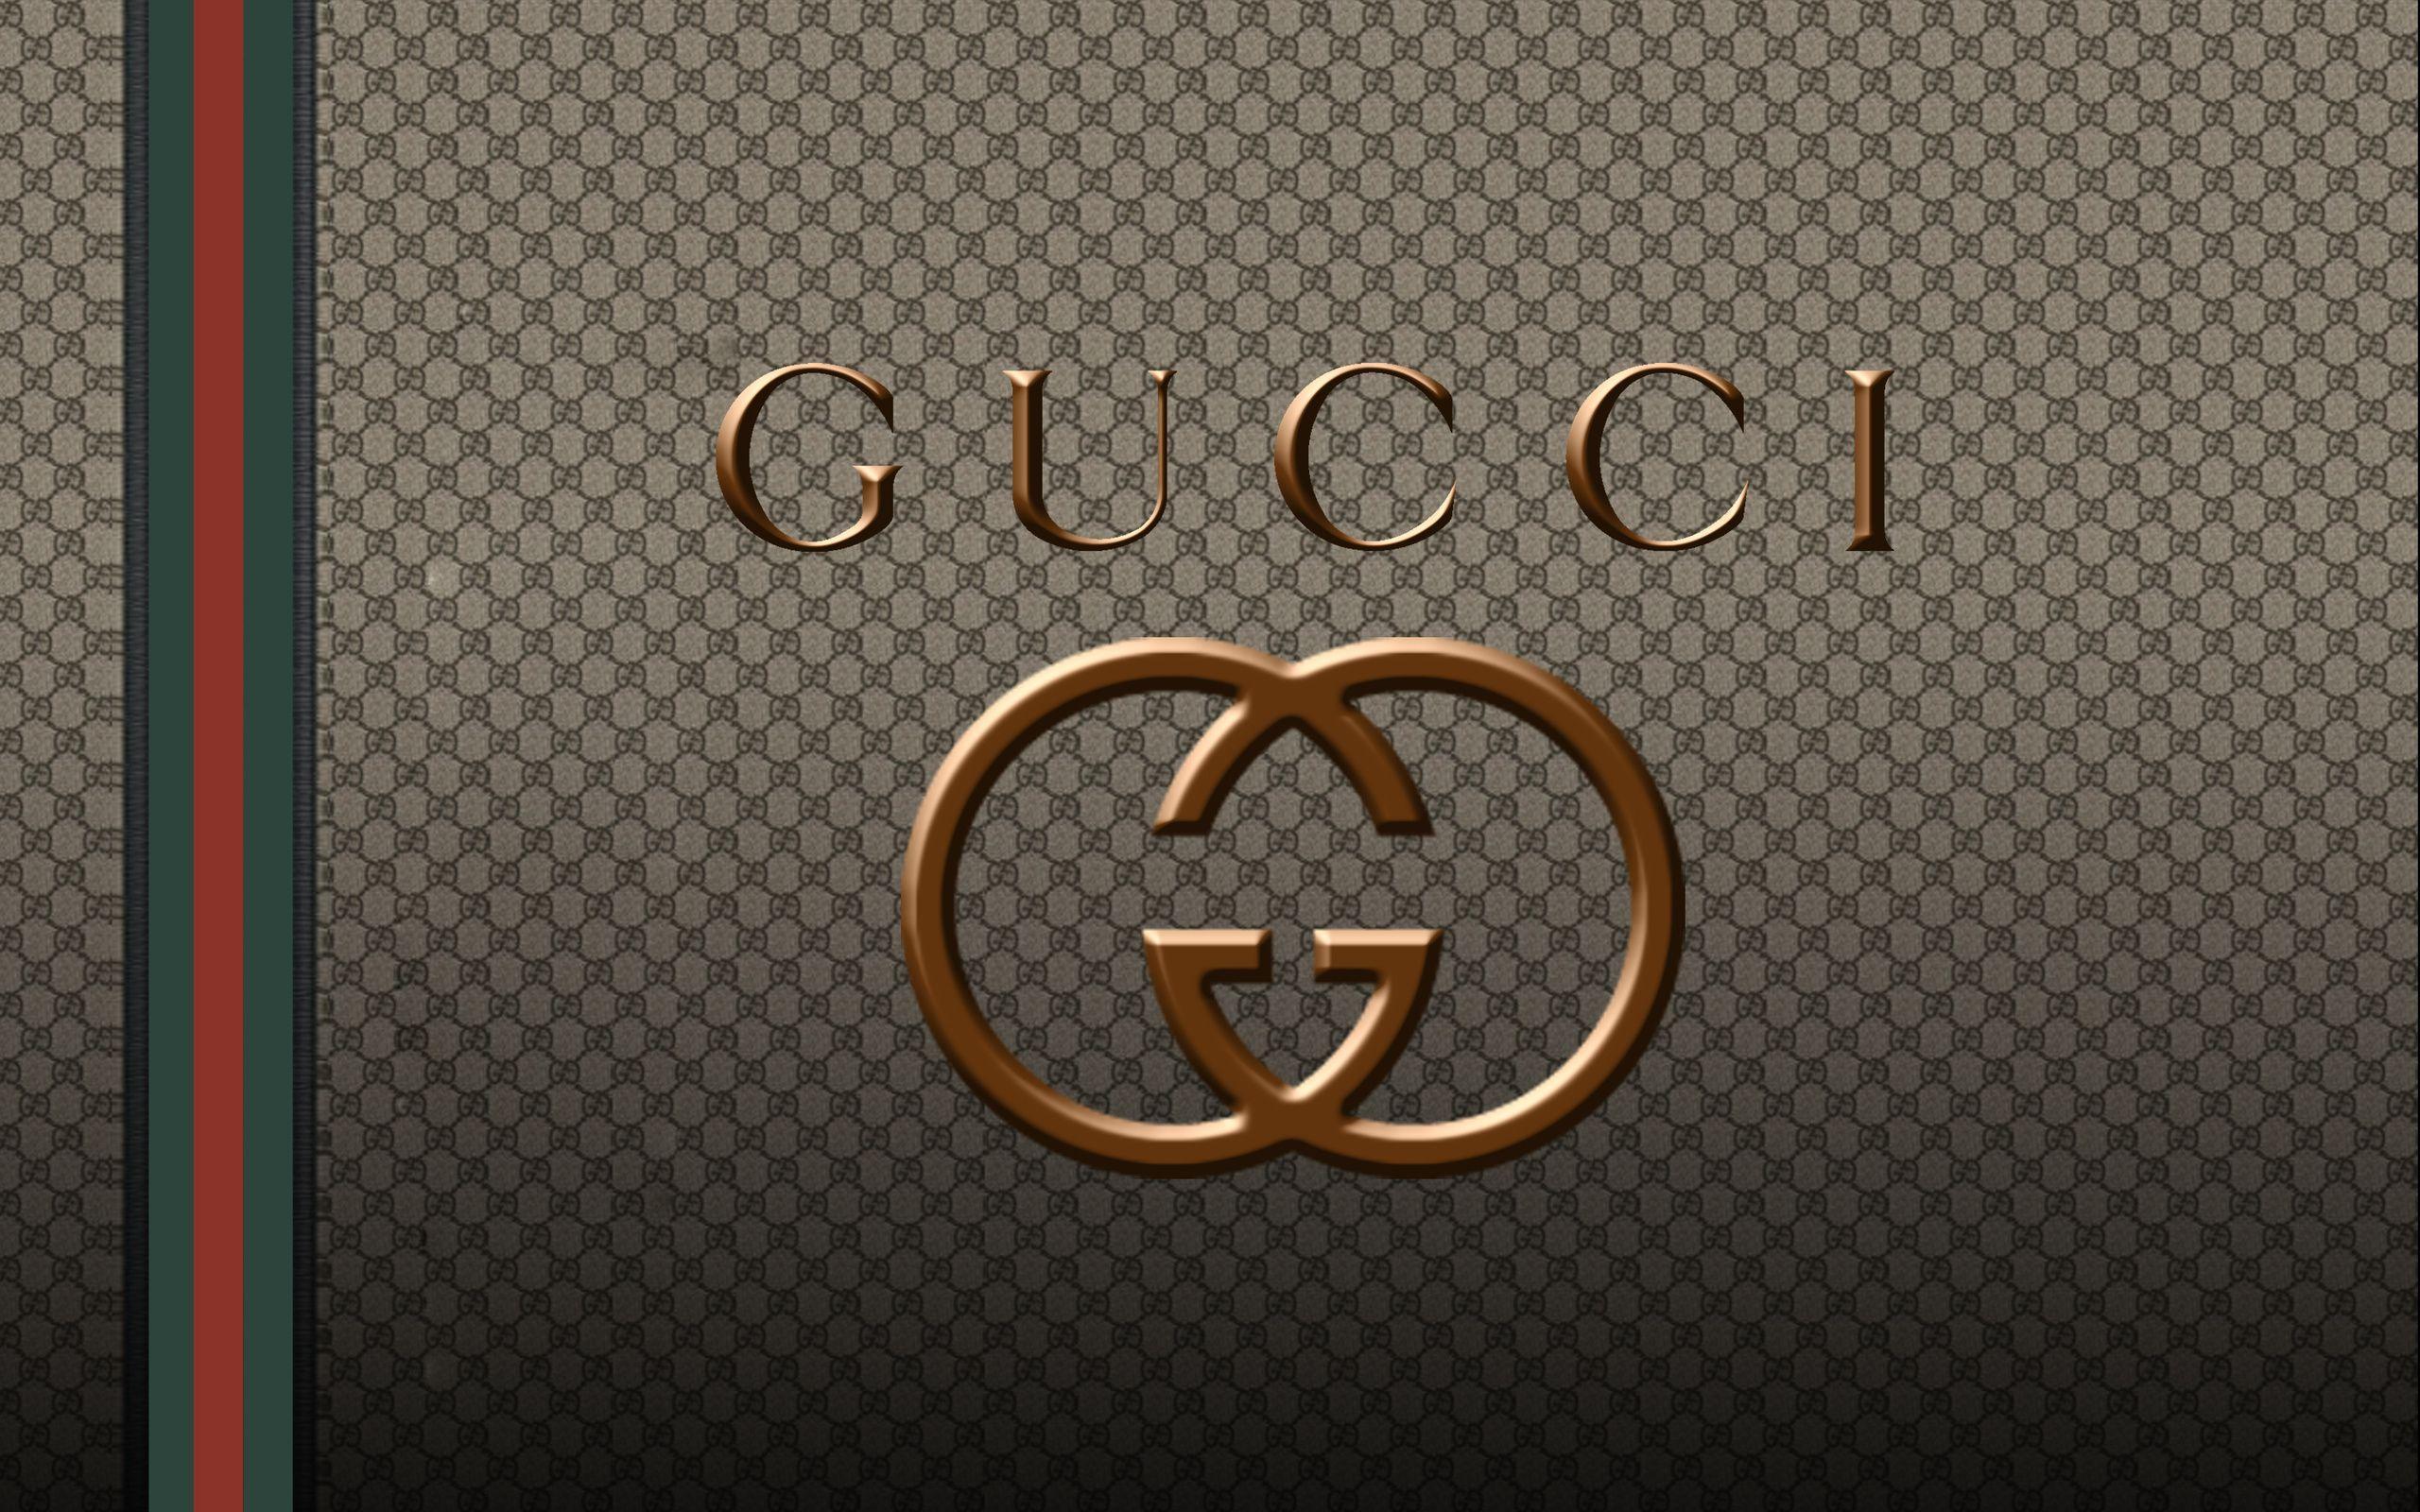 Gucci Wallpaper Collection For Free Download